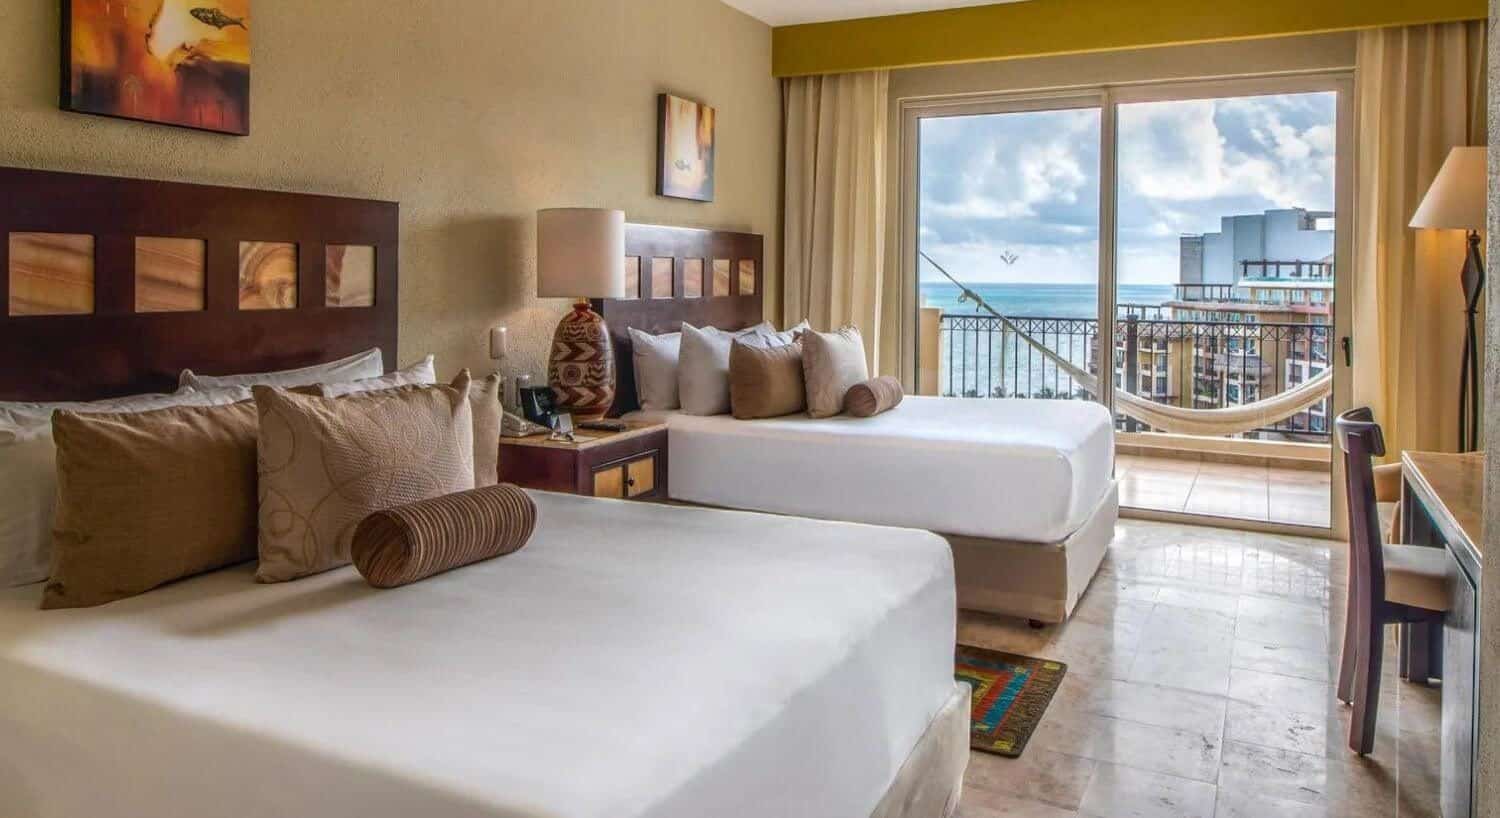 A bedroom with two queen beds with white and brown bedding, a nightsand with lamp in the middle, a writing desk and chair, a plush armchair and floor lamp in the corner, and sliding doors leading out to a private balcony with hammock and resort and ocean views.